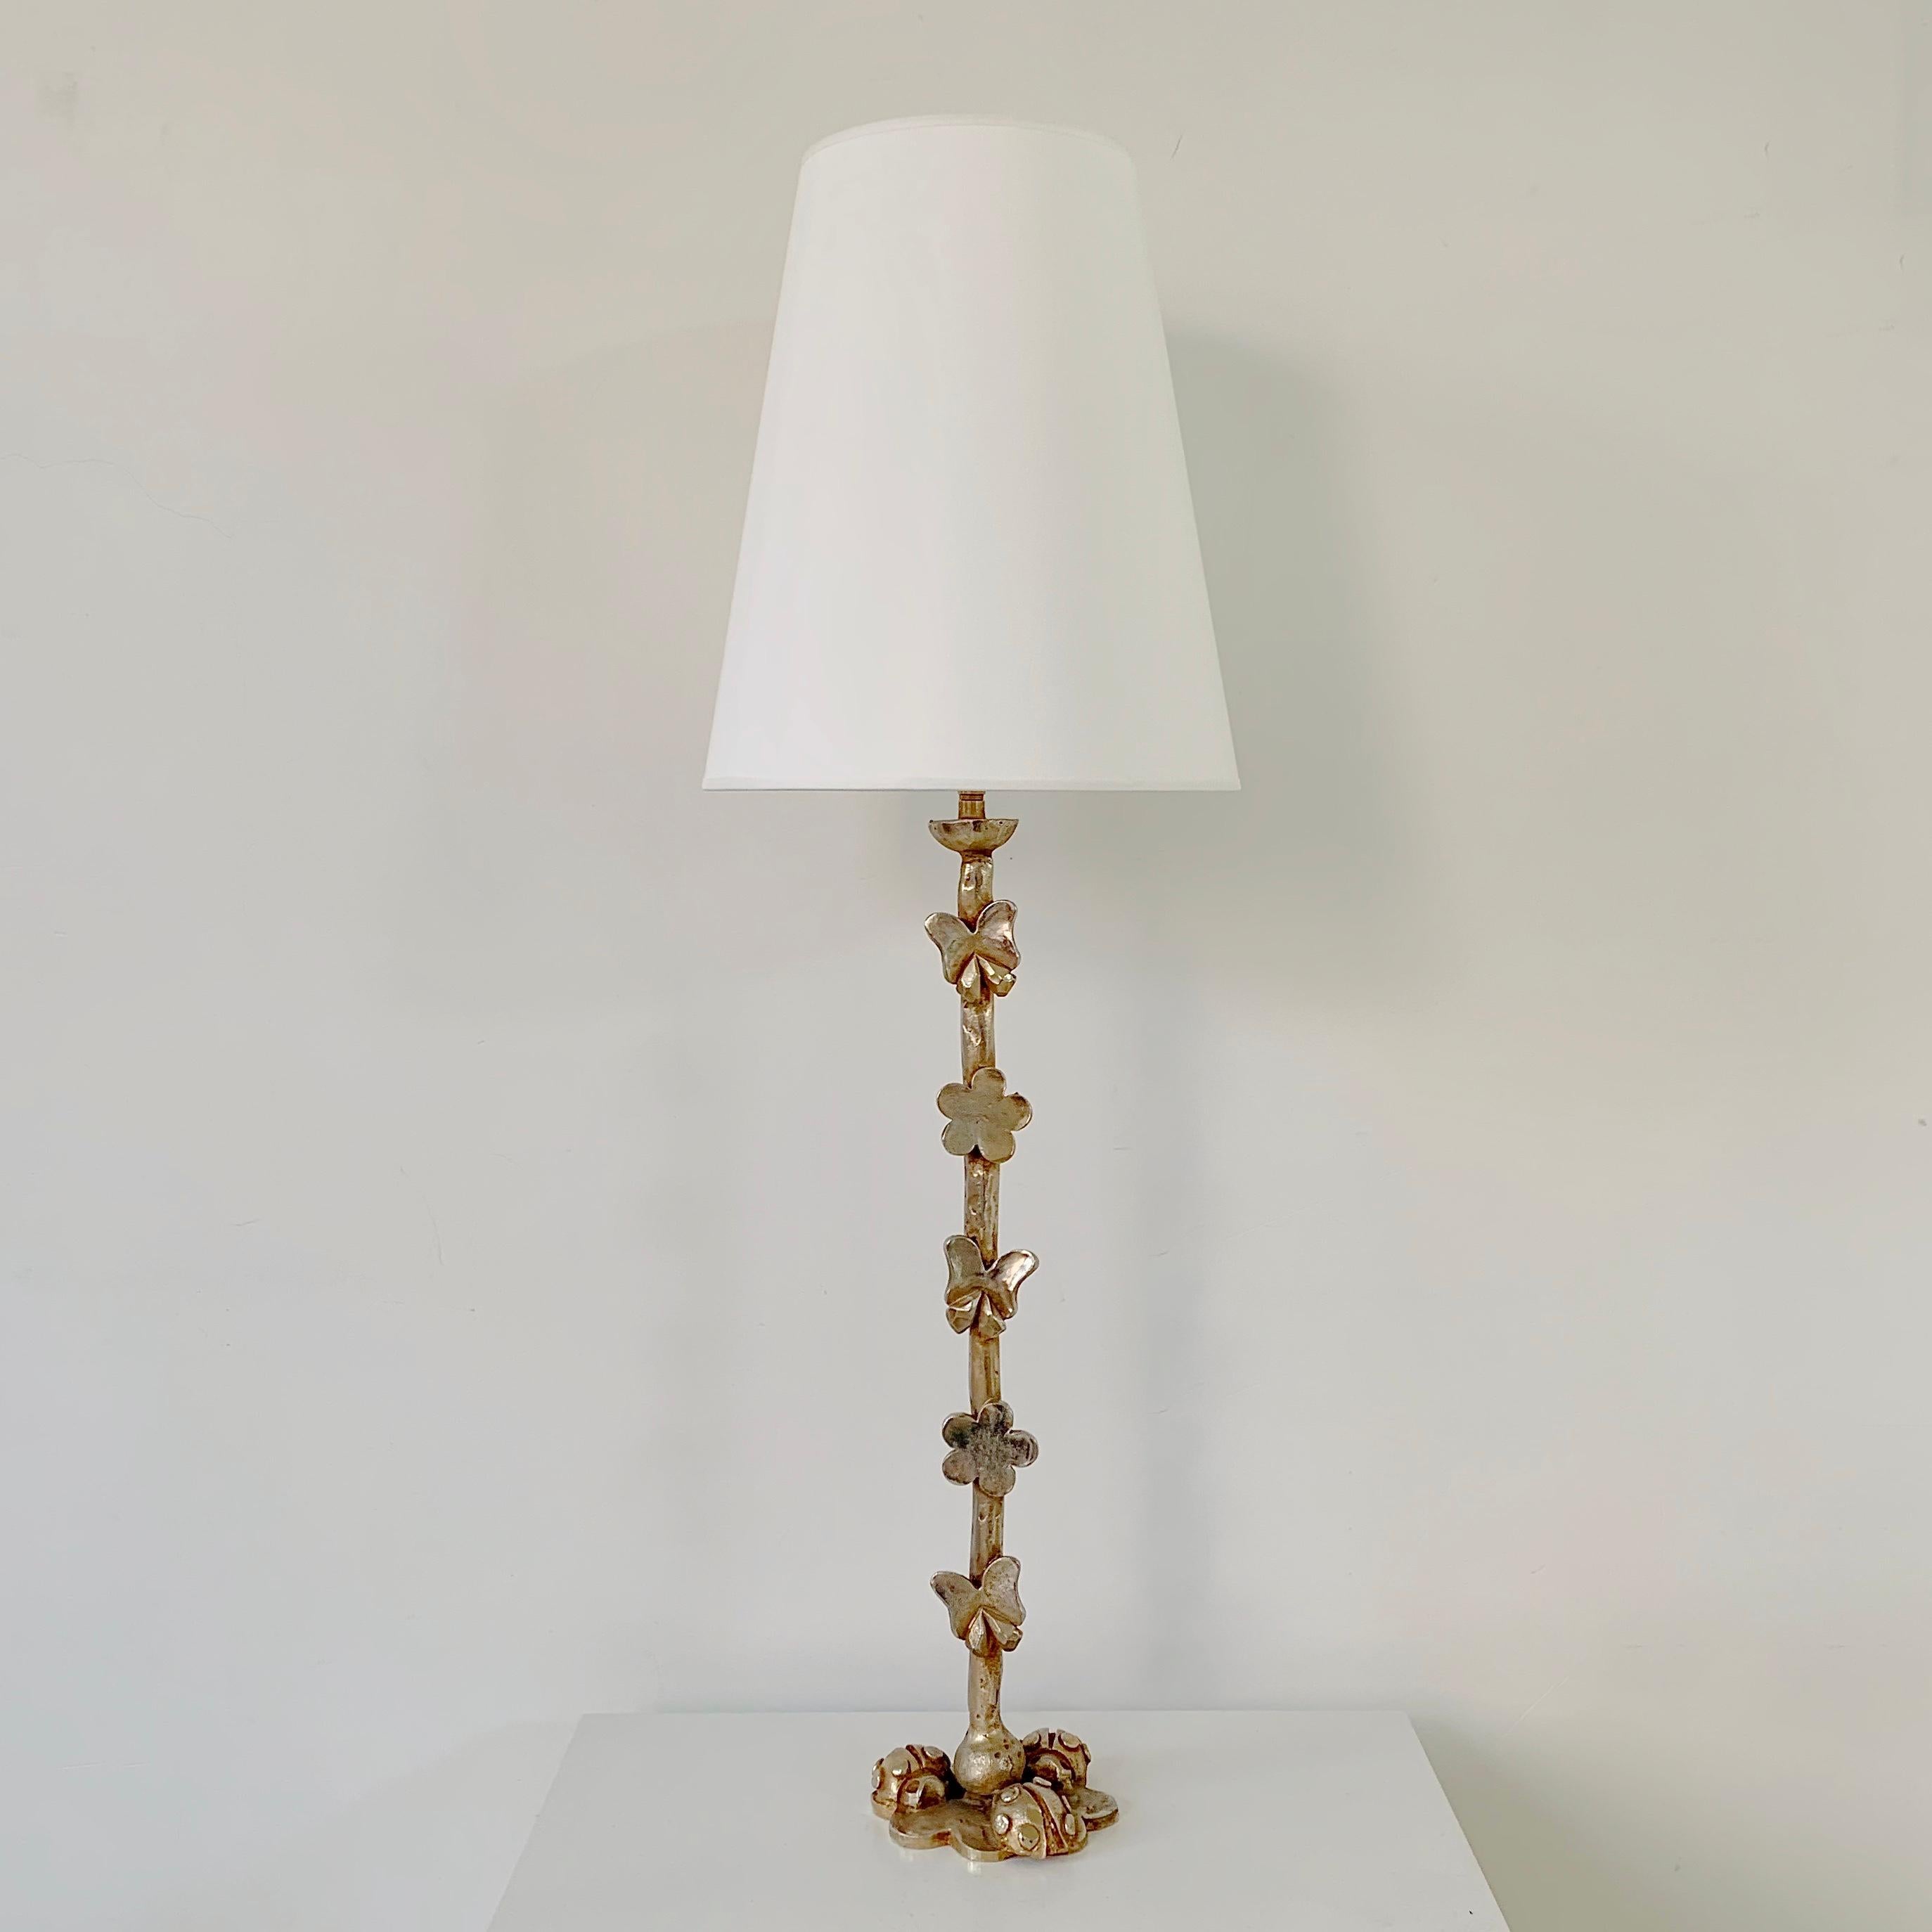 Nice decorative table lamp,  by Nicolas De Waël for Fondica, 1997, France.
Gilt bronze stamped Dewael Fondica France 97.
Butterflies, flowers and ladybugs poetic decor.
New fabric shade.
Rewired, one E27 bulb 
Good condition.
All purchases are